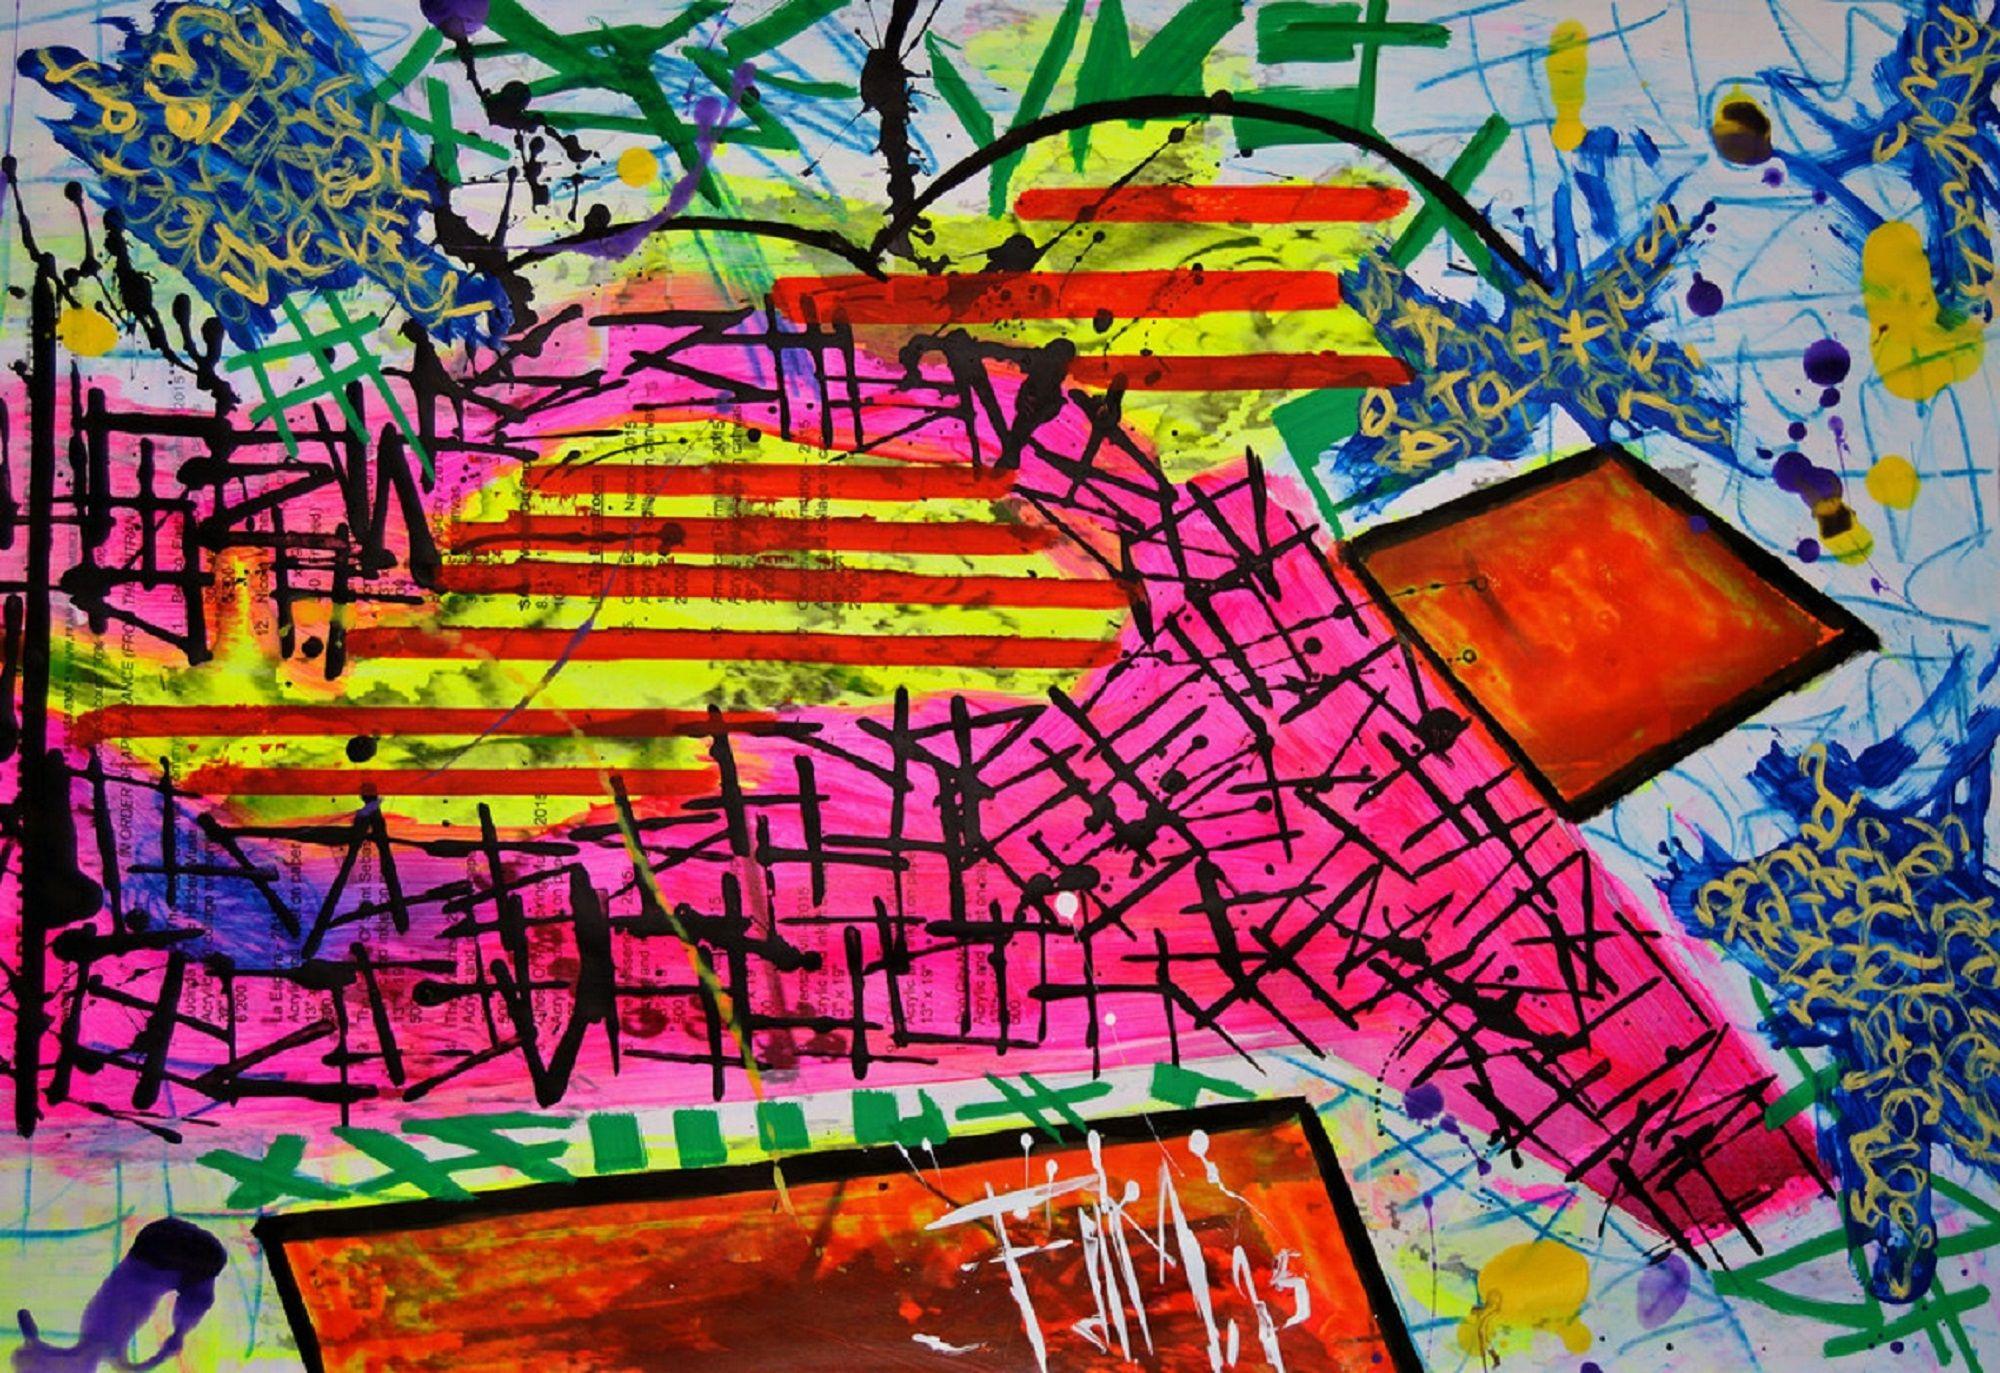 This is an original one of a kind abstract artwork by renowned contemporary NYC artist Franck de las Mercedes.This series of works fuse writing and hieroglyphic-like text which the artist applies using palette knives. The manipulation of paint and